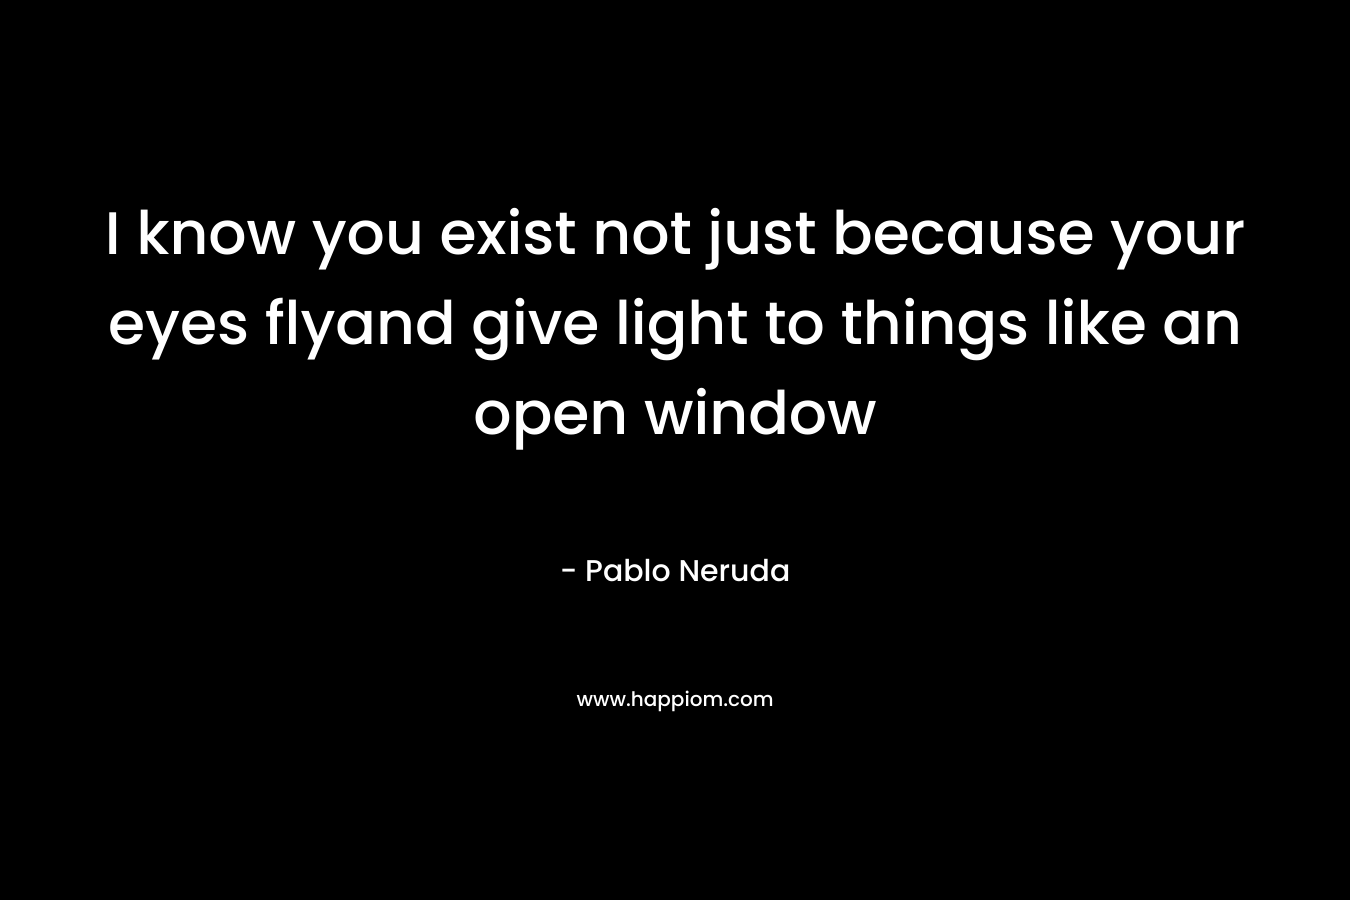 I know you exist not just because your eyes flyand give light to things like an open window